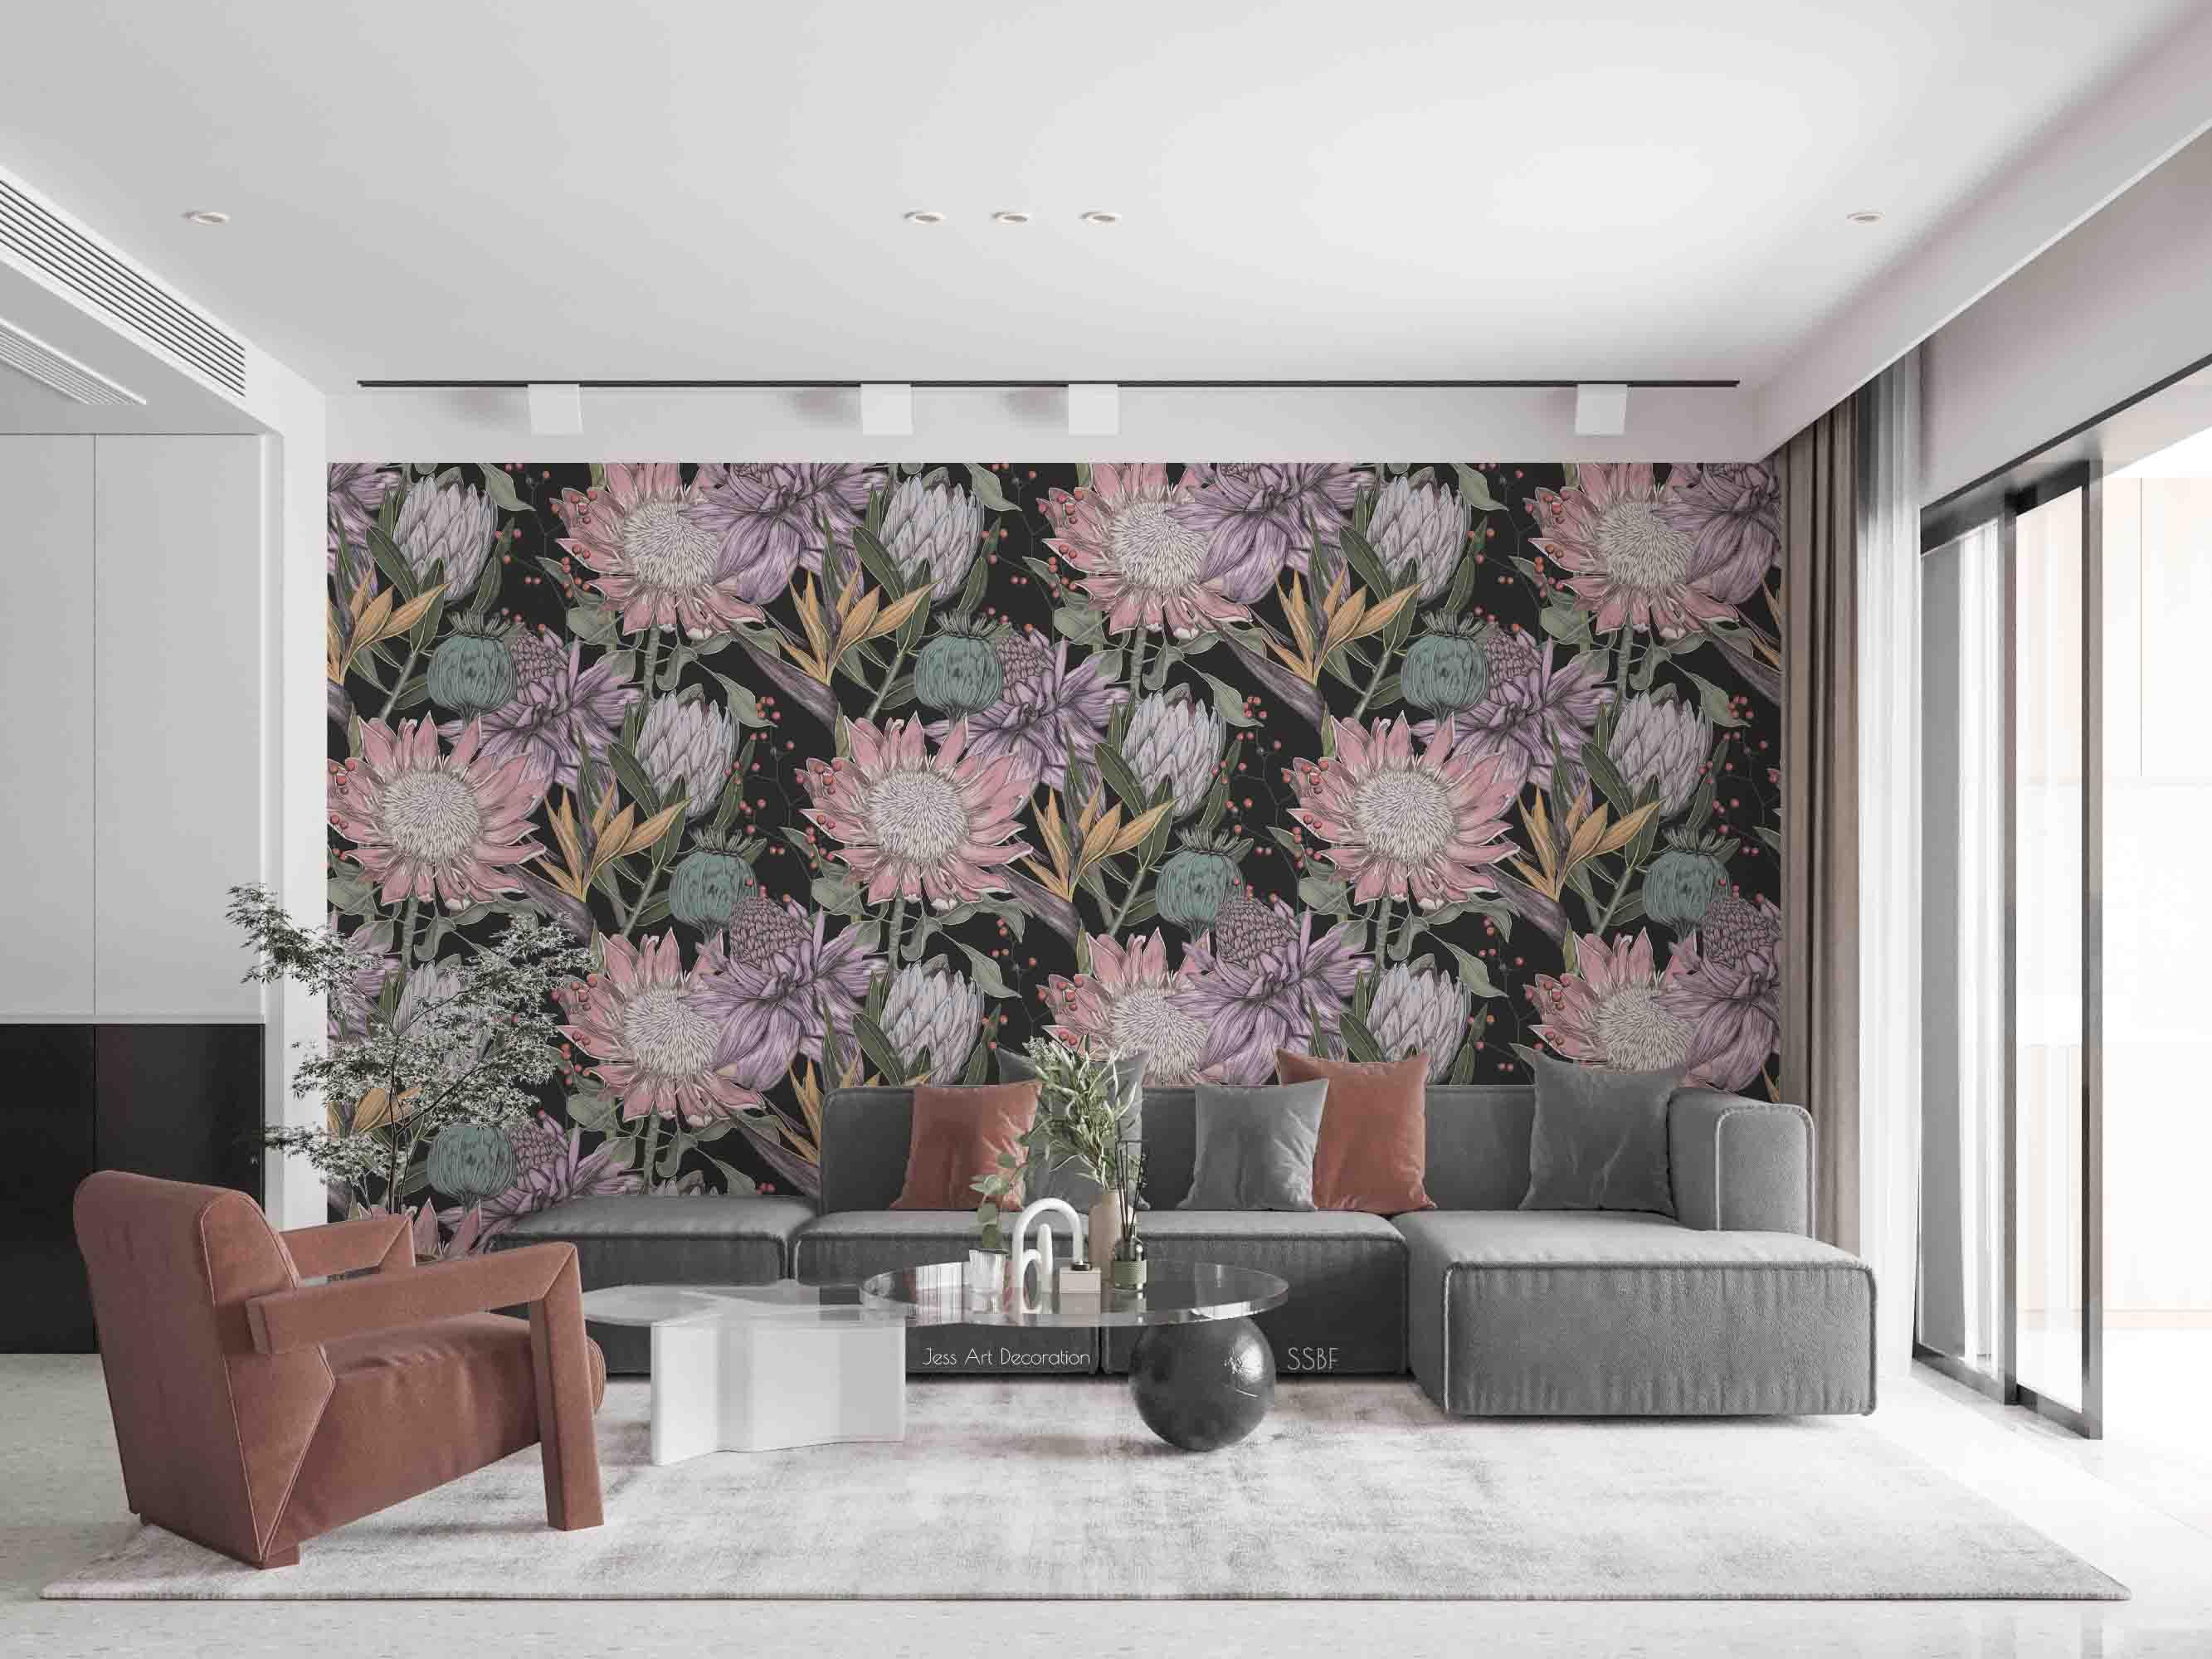 3D Vintage Blooming Flowers Leaves Pattern Wall Mural Wallpaper GD 3524- Jess Art Decoration